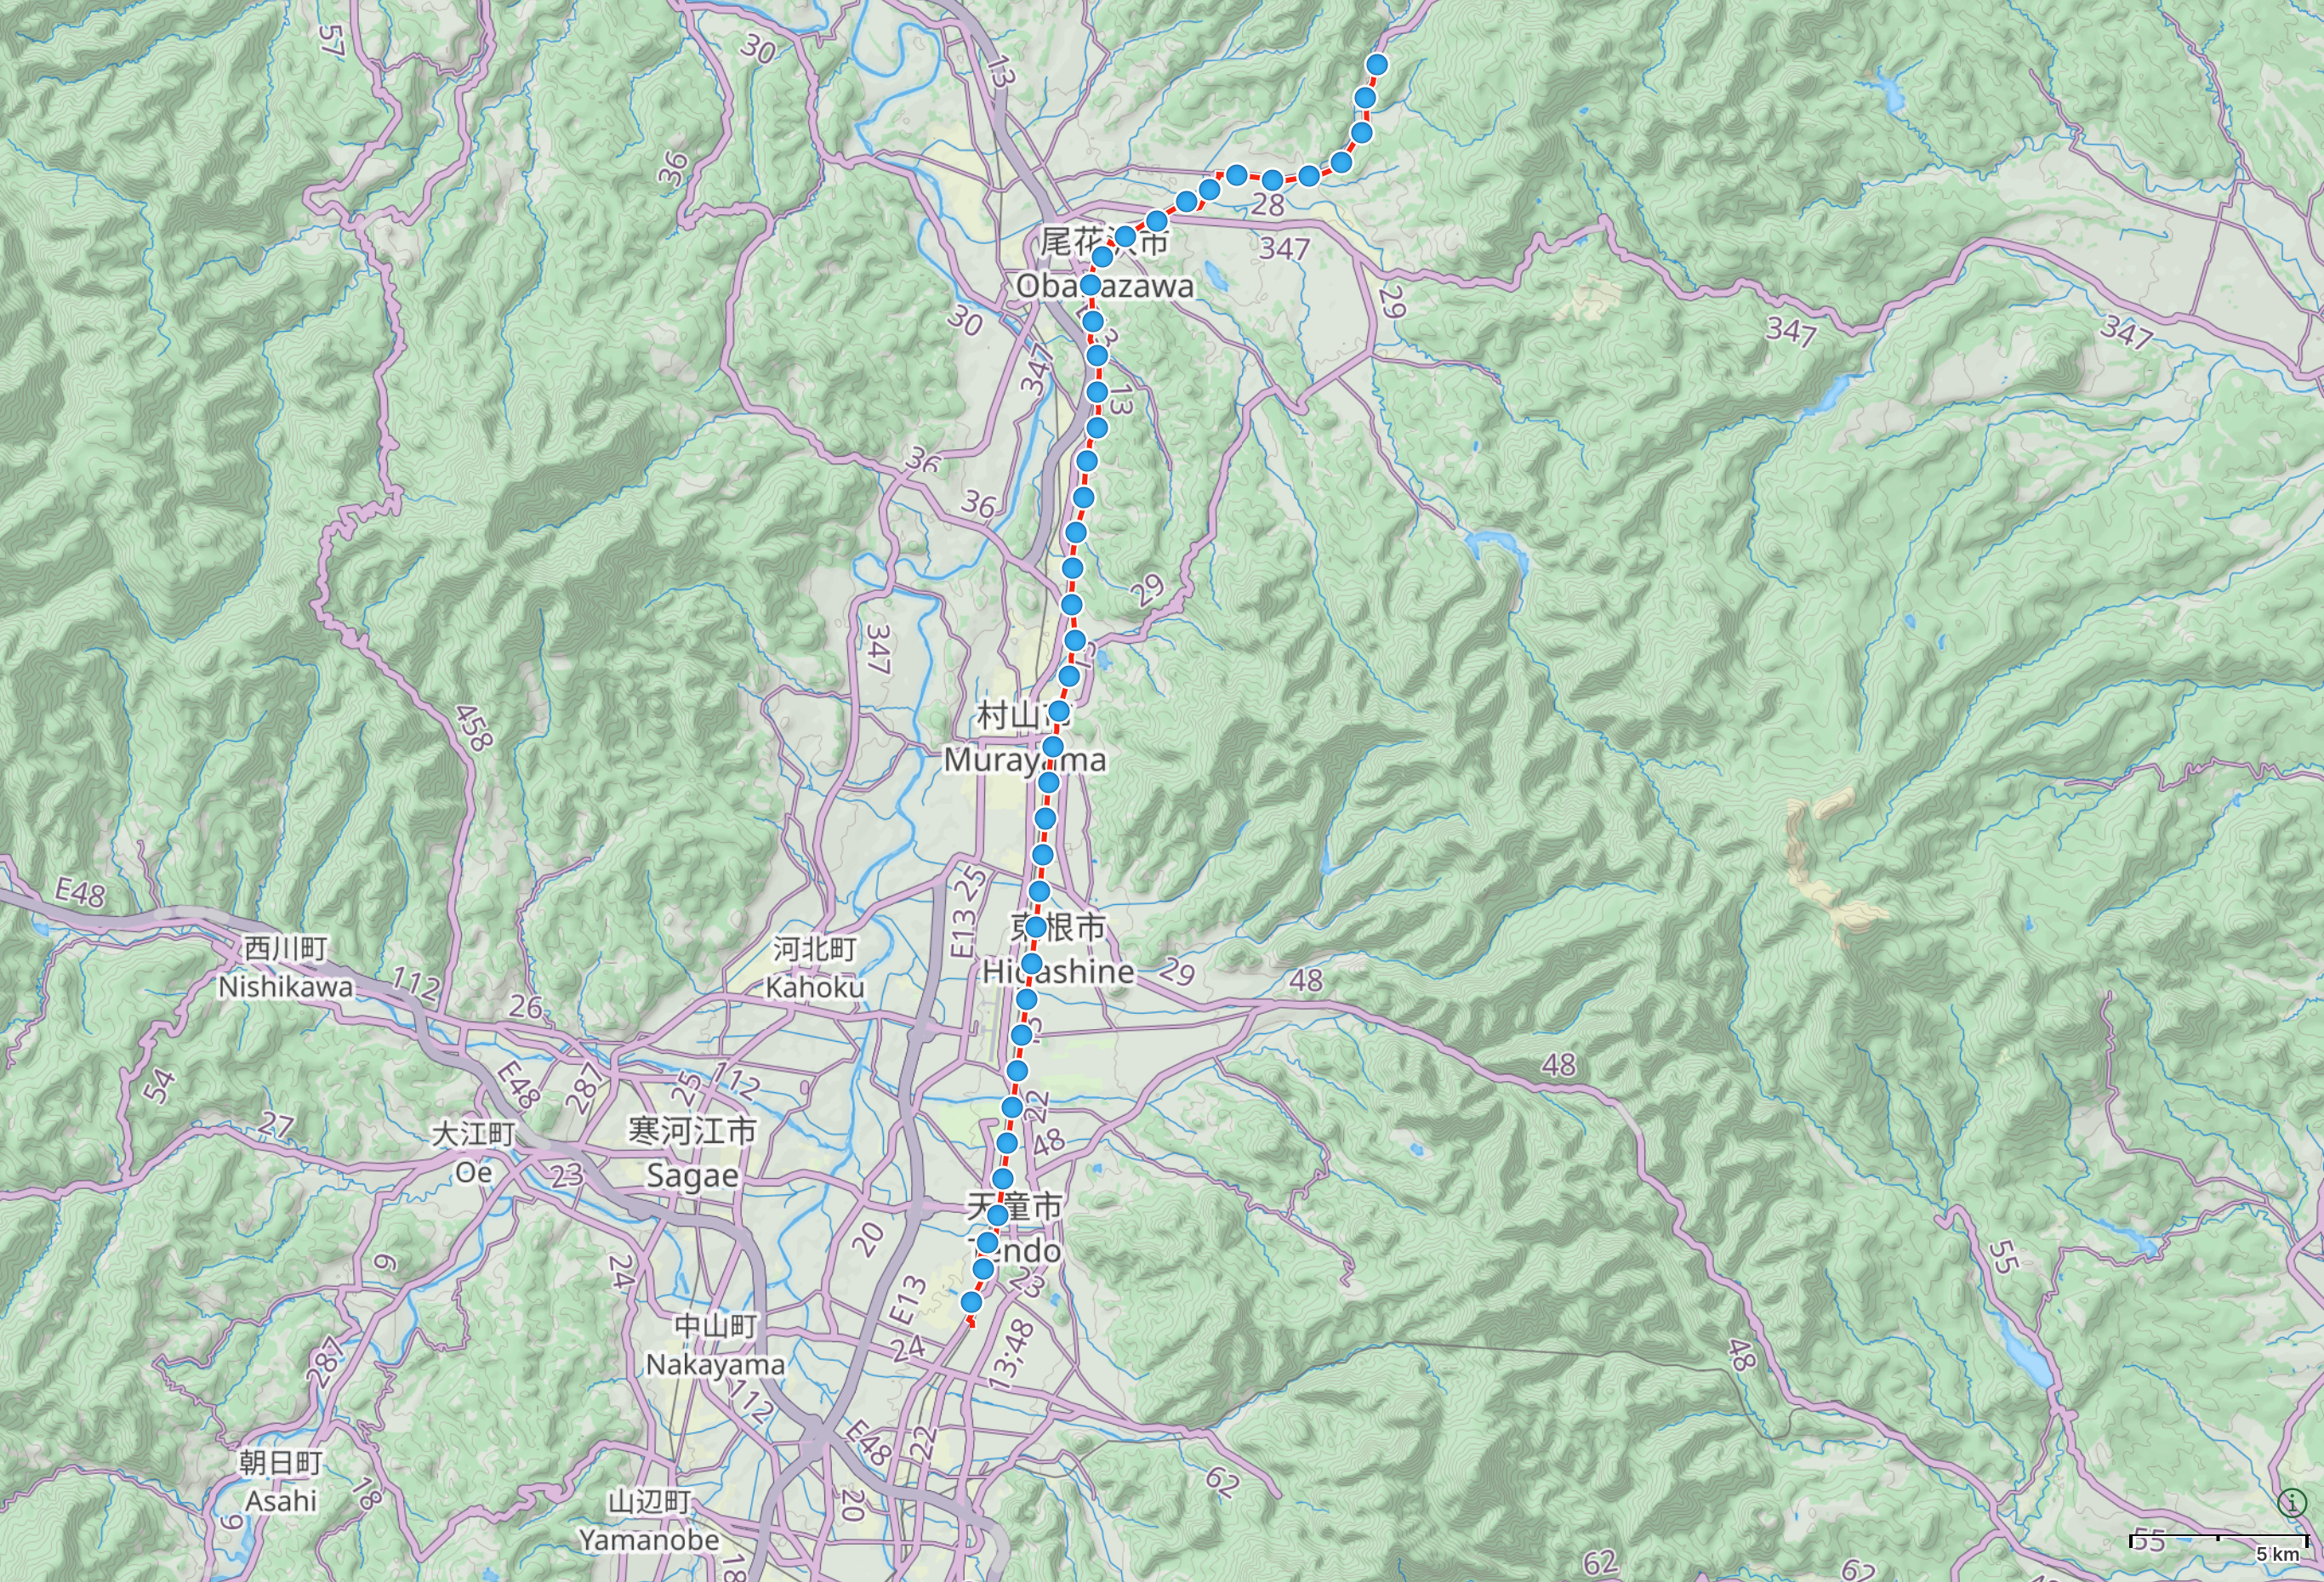 Map of Yamagata prefecture with author’s route from Tendō to Tomiyama highlighted.